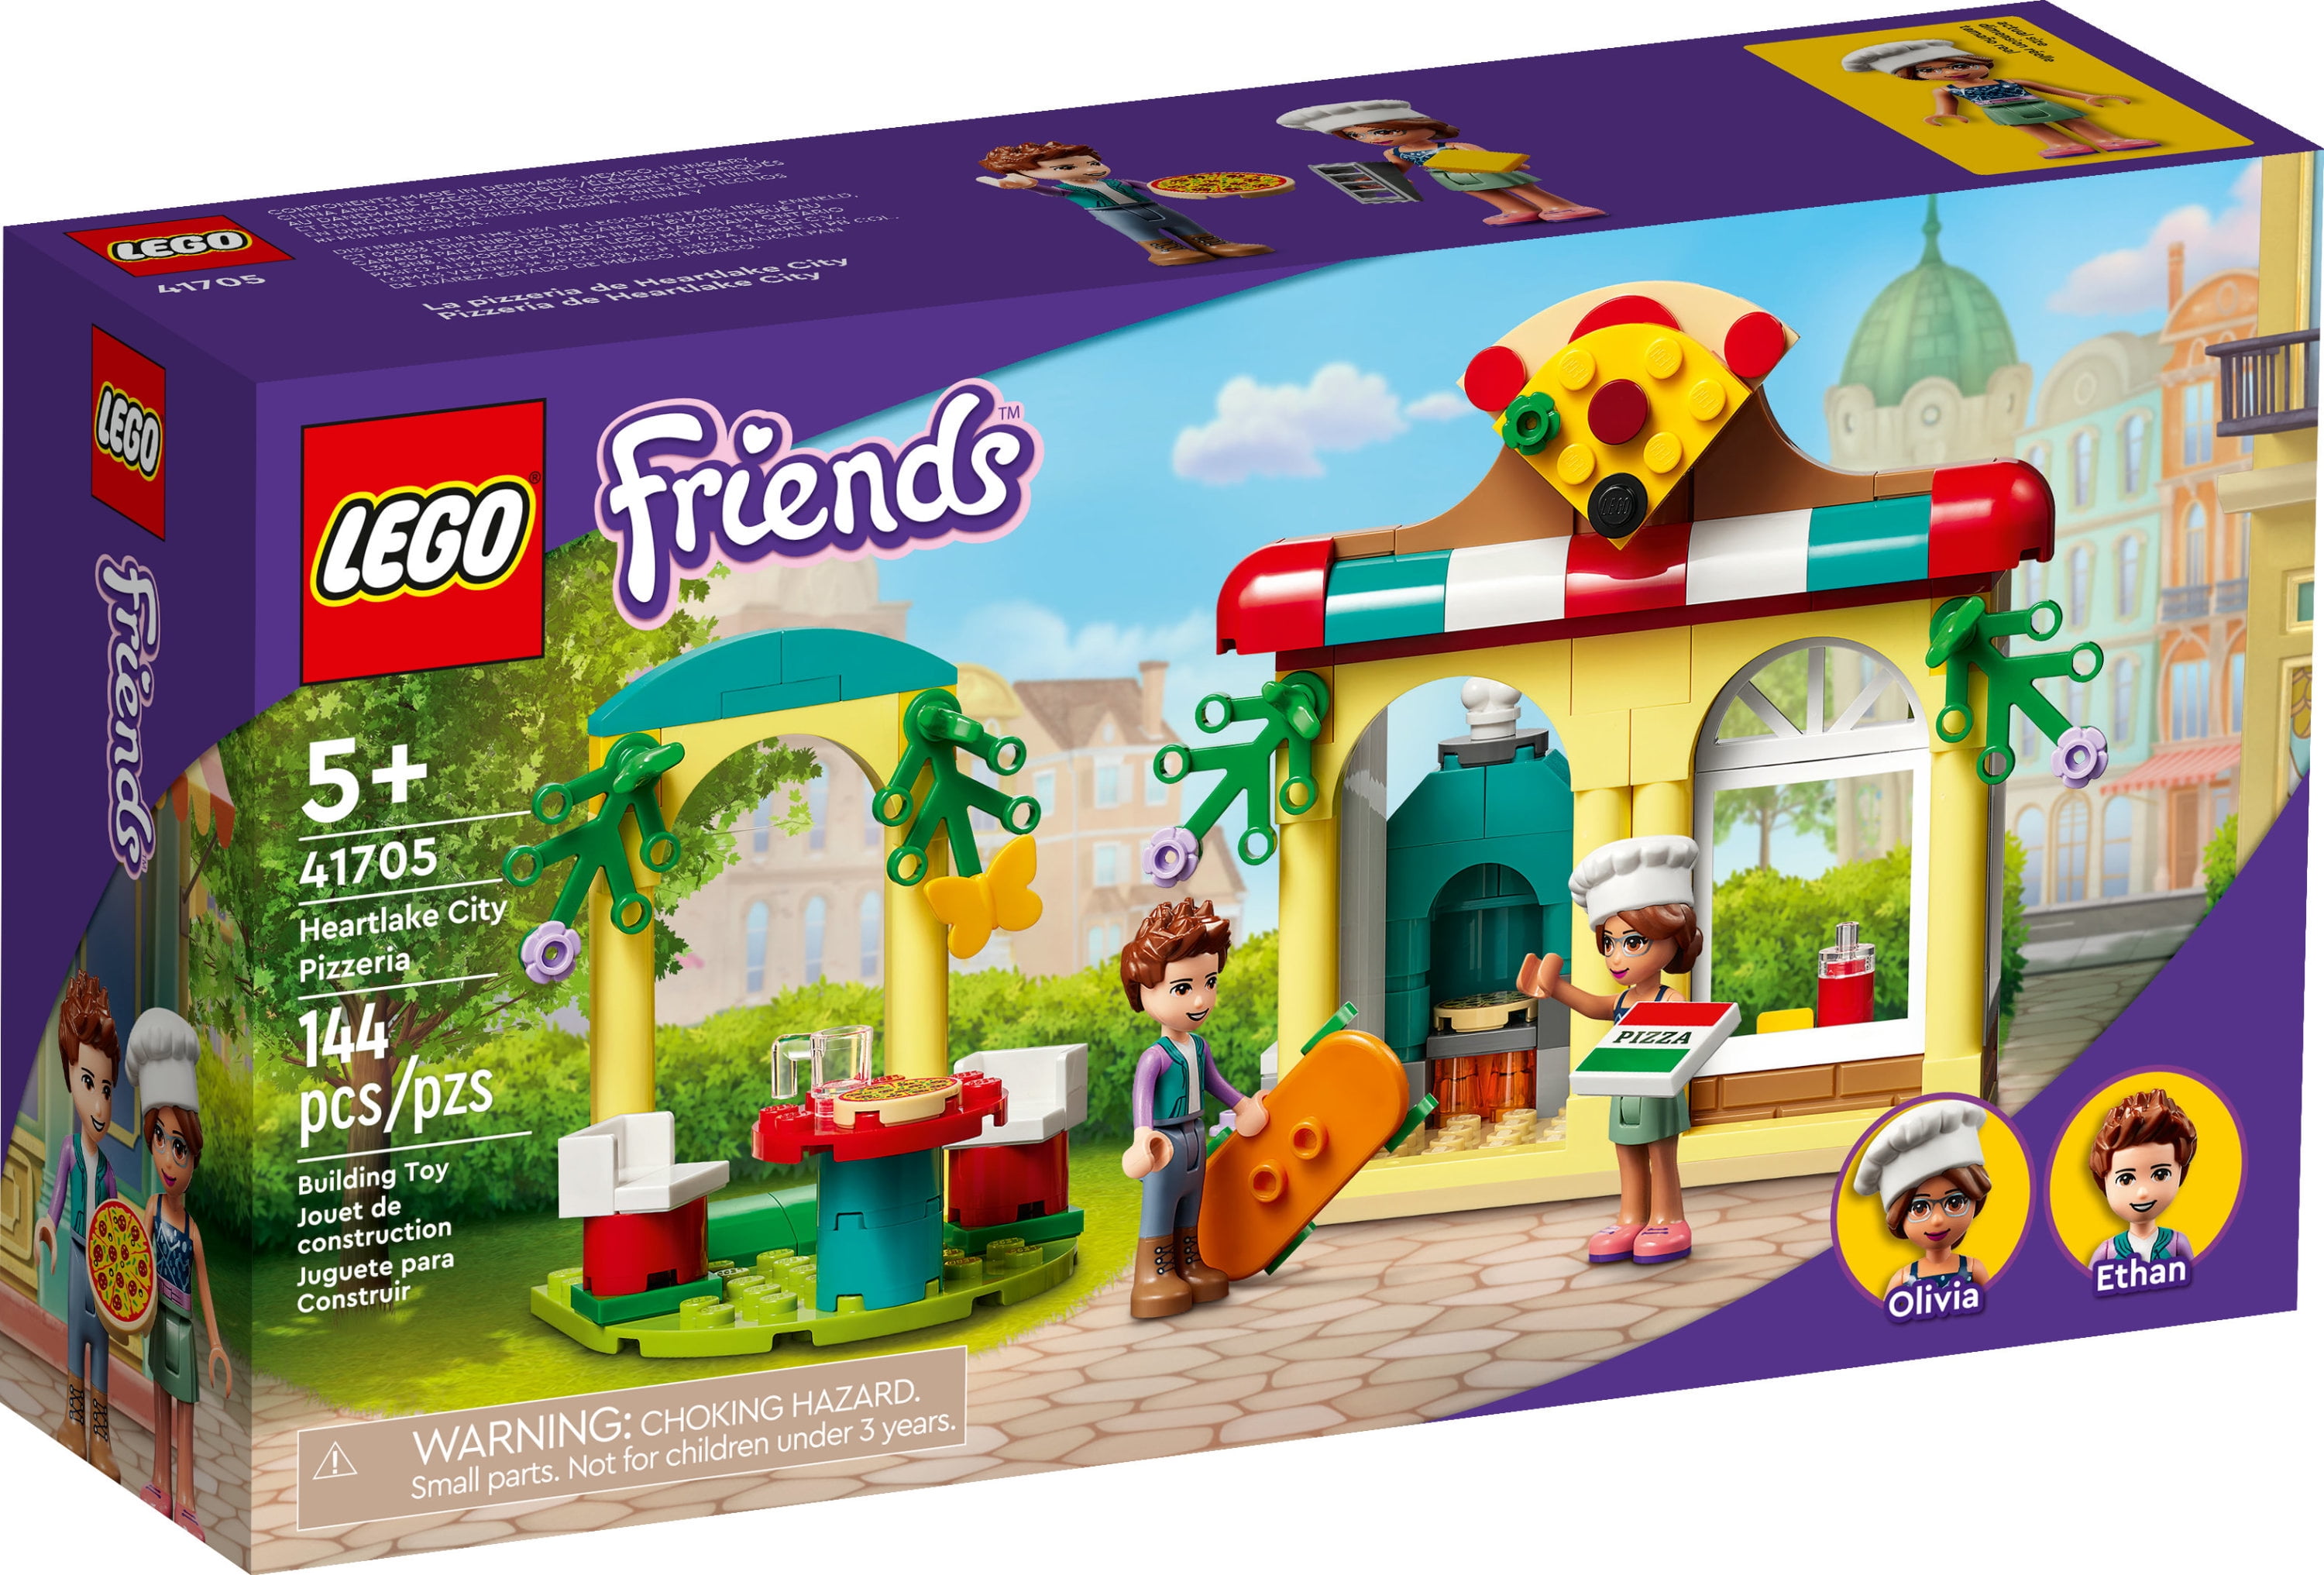 LEGO Friends Heartlake City Pizzeria 41705 Restaurant Set, Creative Gifts, for Kids 5 Plus Years Old with Olivia & Ethan Mini-Dolls - Walmart.com